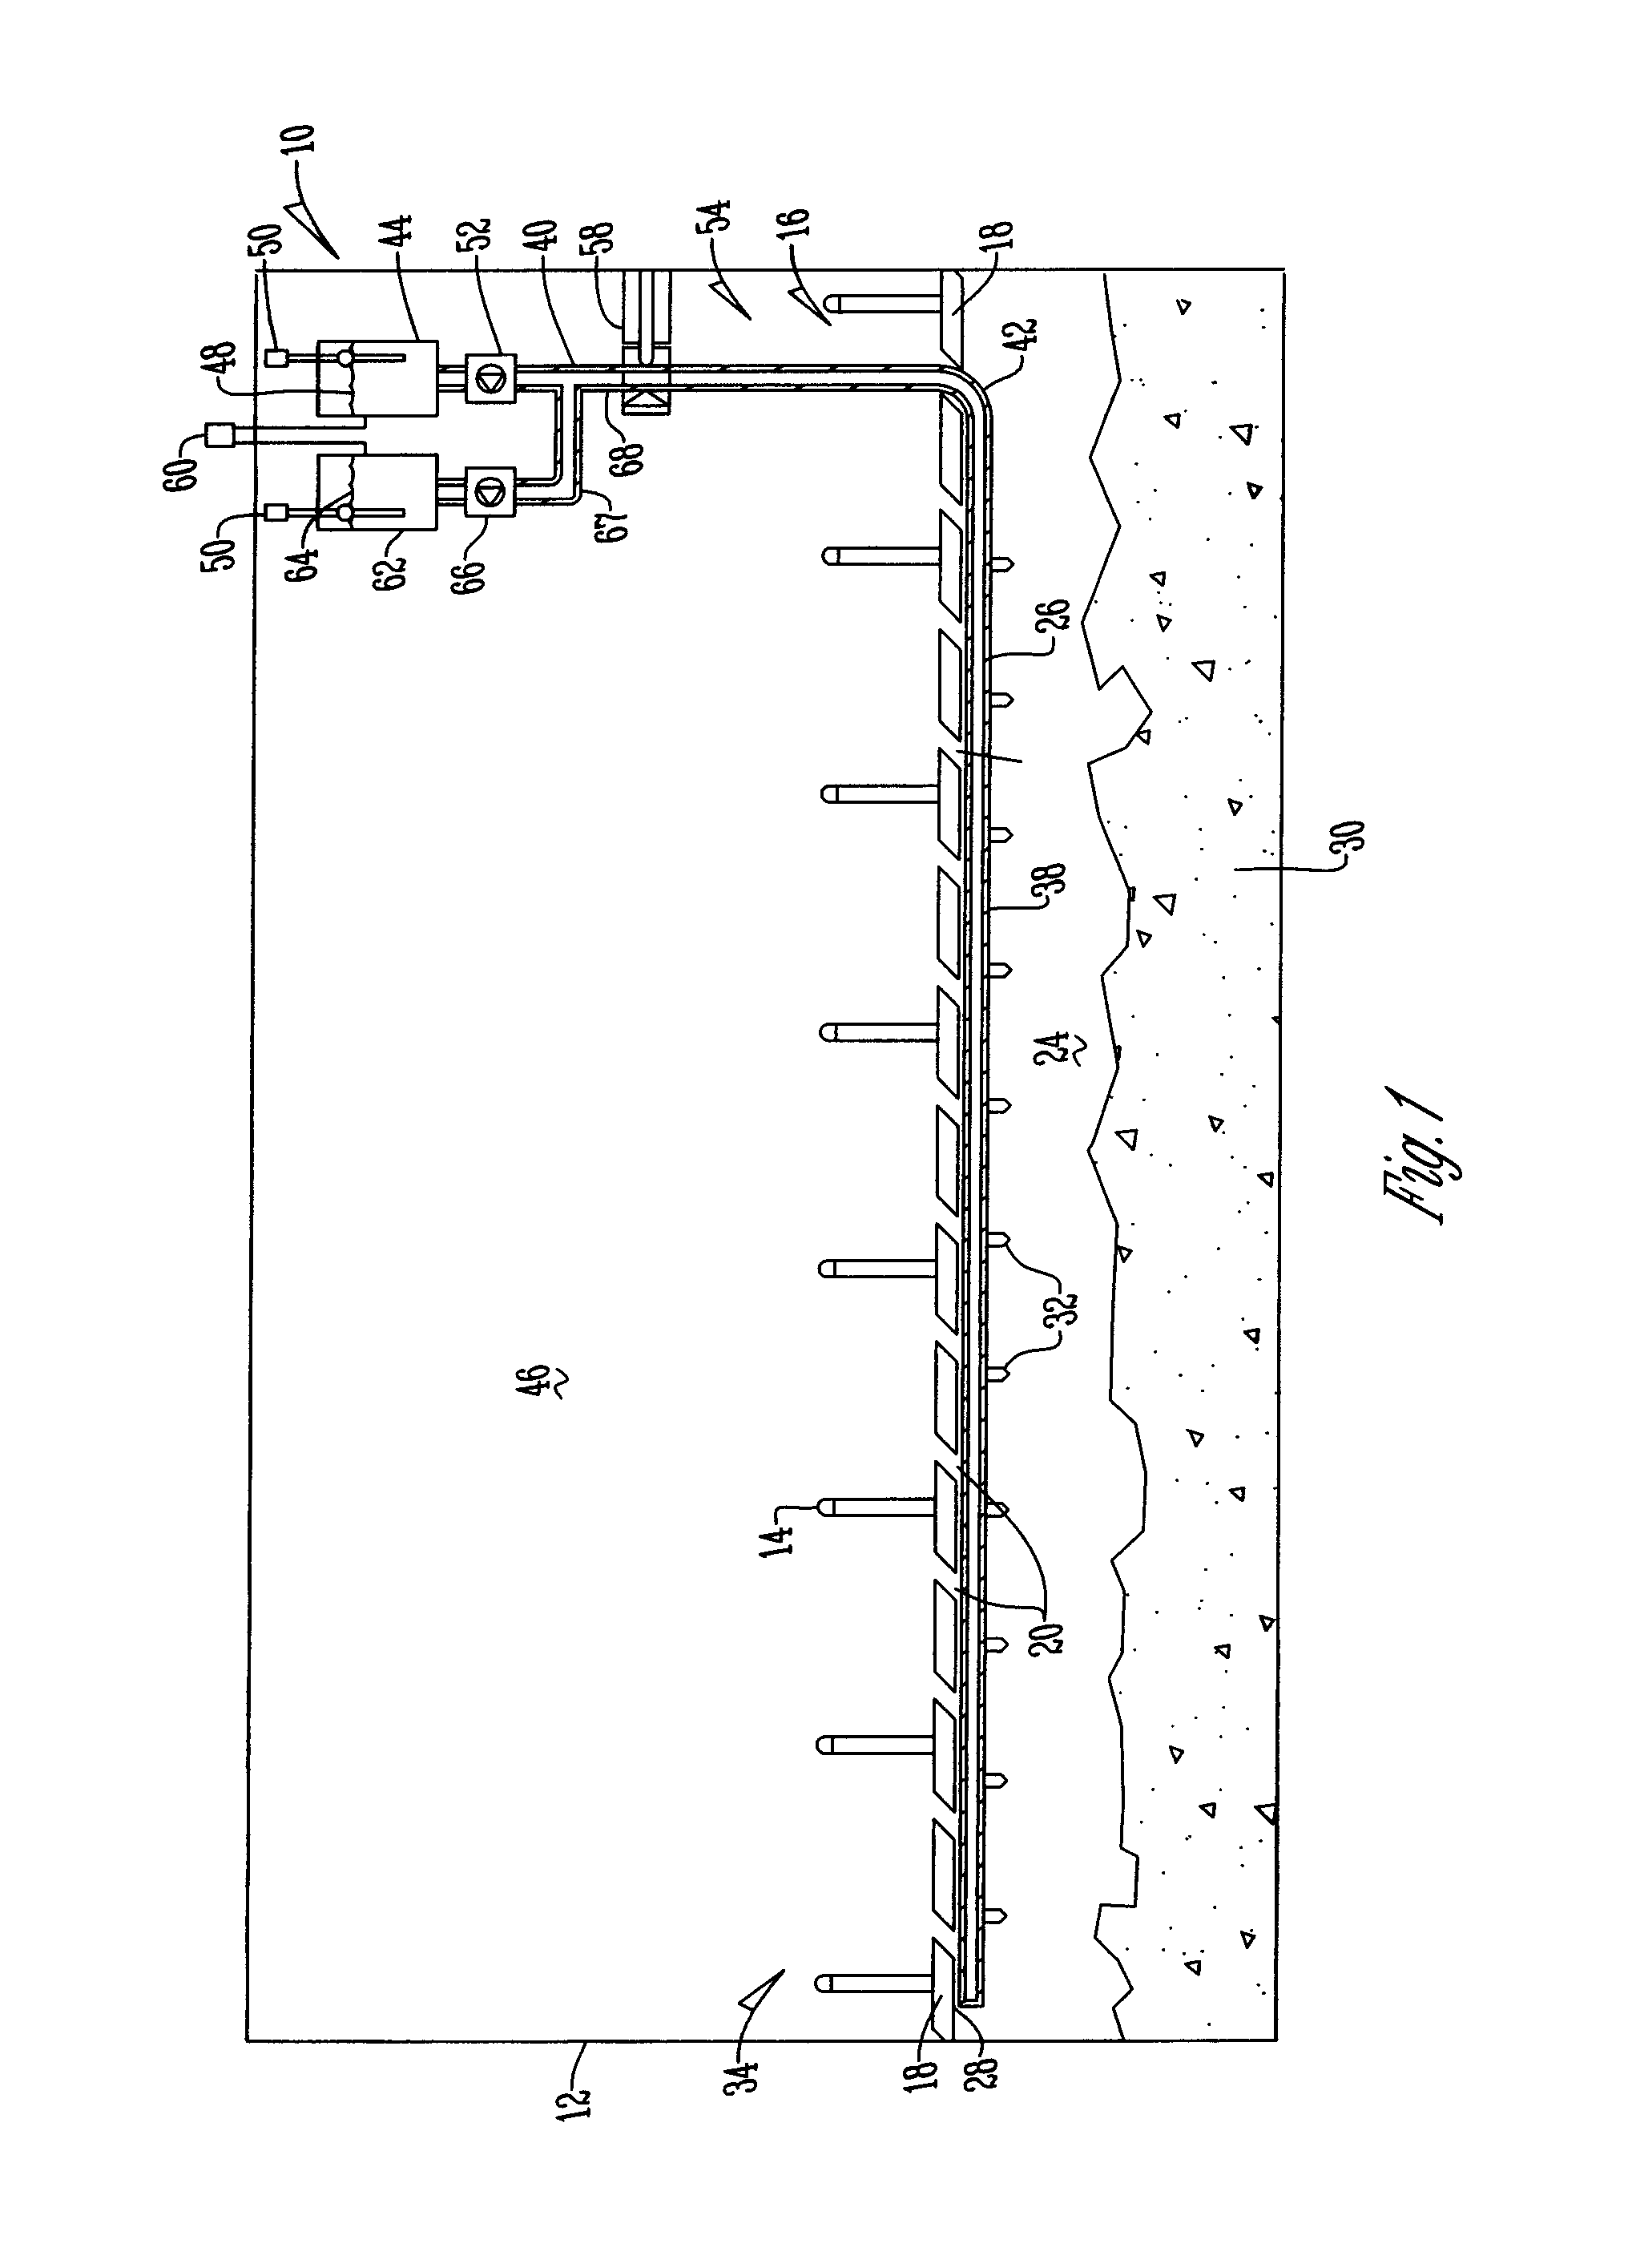 System and method for reducing emissions in a hog confinement facility